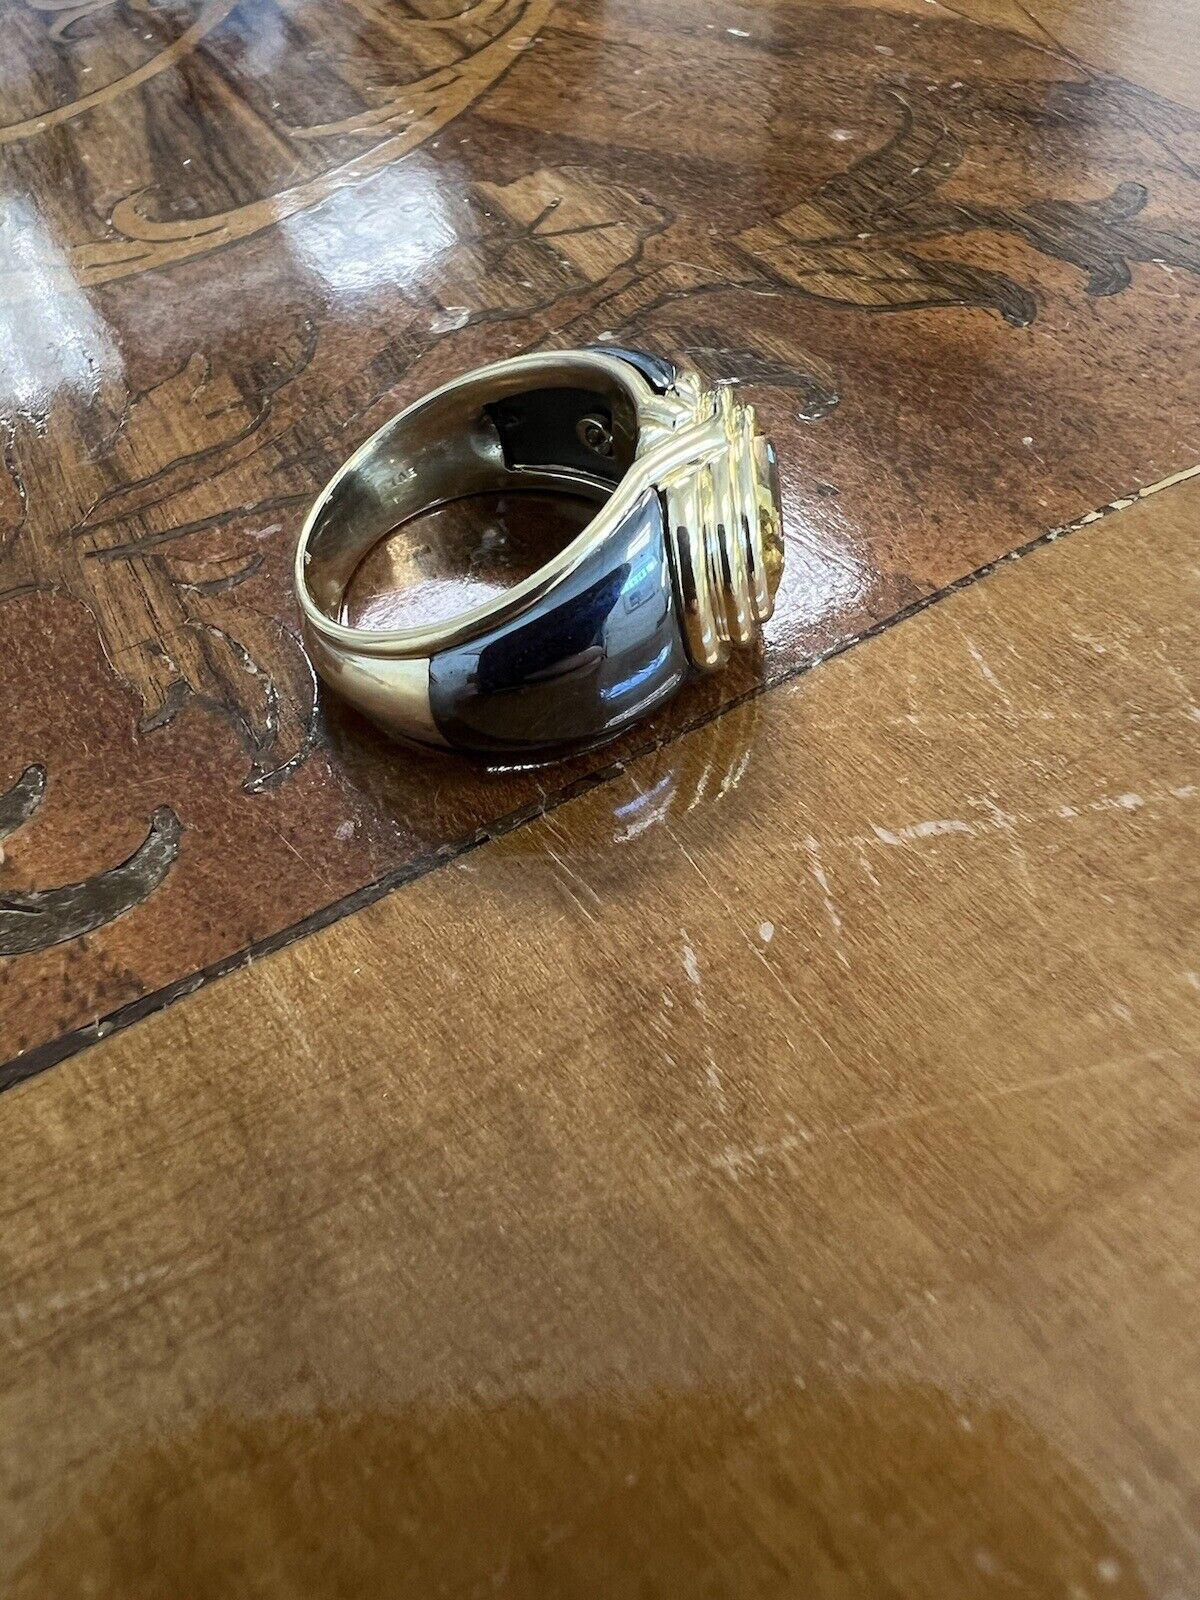 Bvlgari Italy 18k Yellow Gold, Hematite & Yellow Sapphire Ring Circa 1980s Vintage


Here is your chance to purchase a beautiful and highly collectible designer ring  Truly a great piece at a great price! 

Details:
The piece was created by Bvlgari